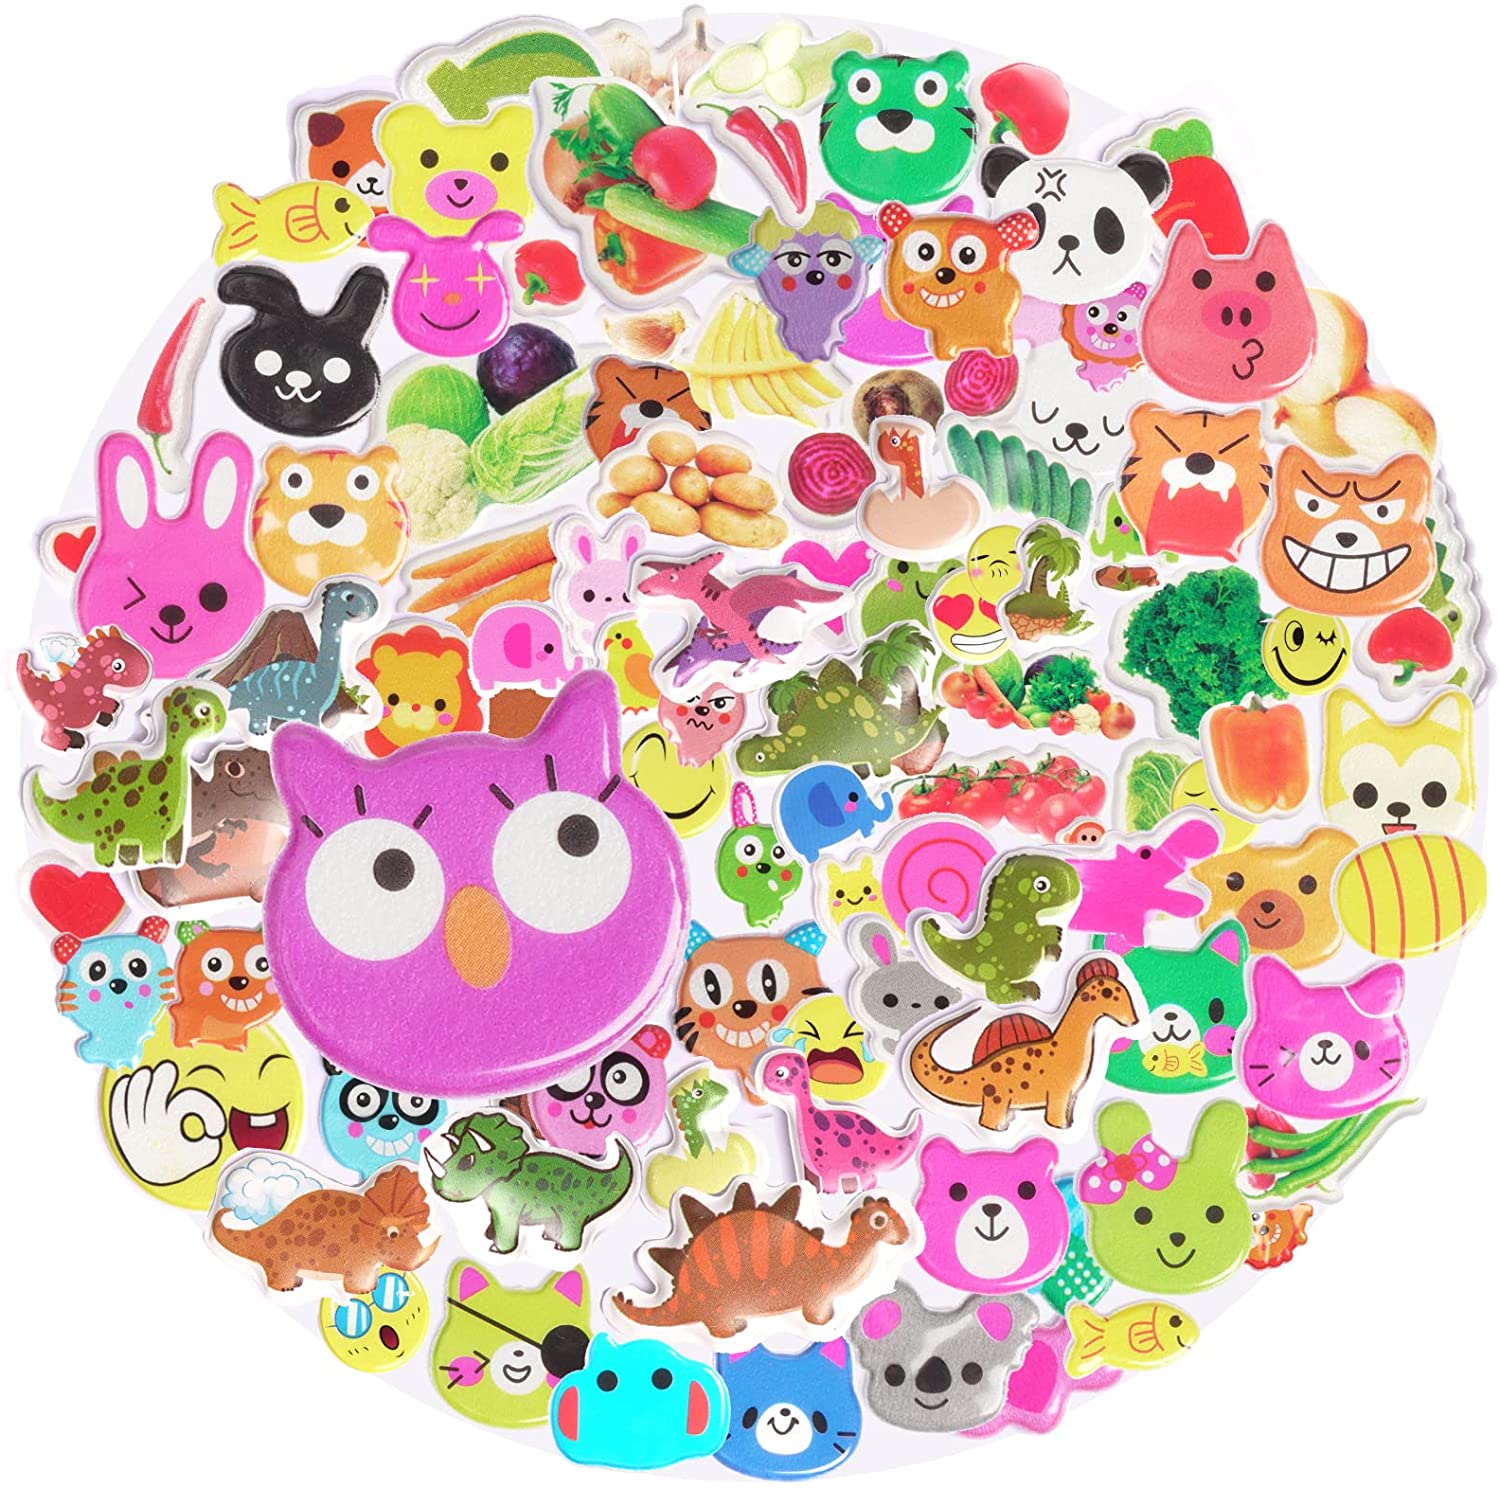 3D Stickers For Kids & Toddlers 250+ Puffy Assorted Stickers Packs For Scrapbook Bullet Journal Including Animal, Fruits, Fish, Dinosaurs, Cars, Numbers, Smiley Face, Heart